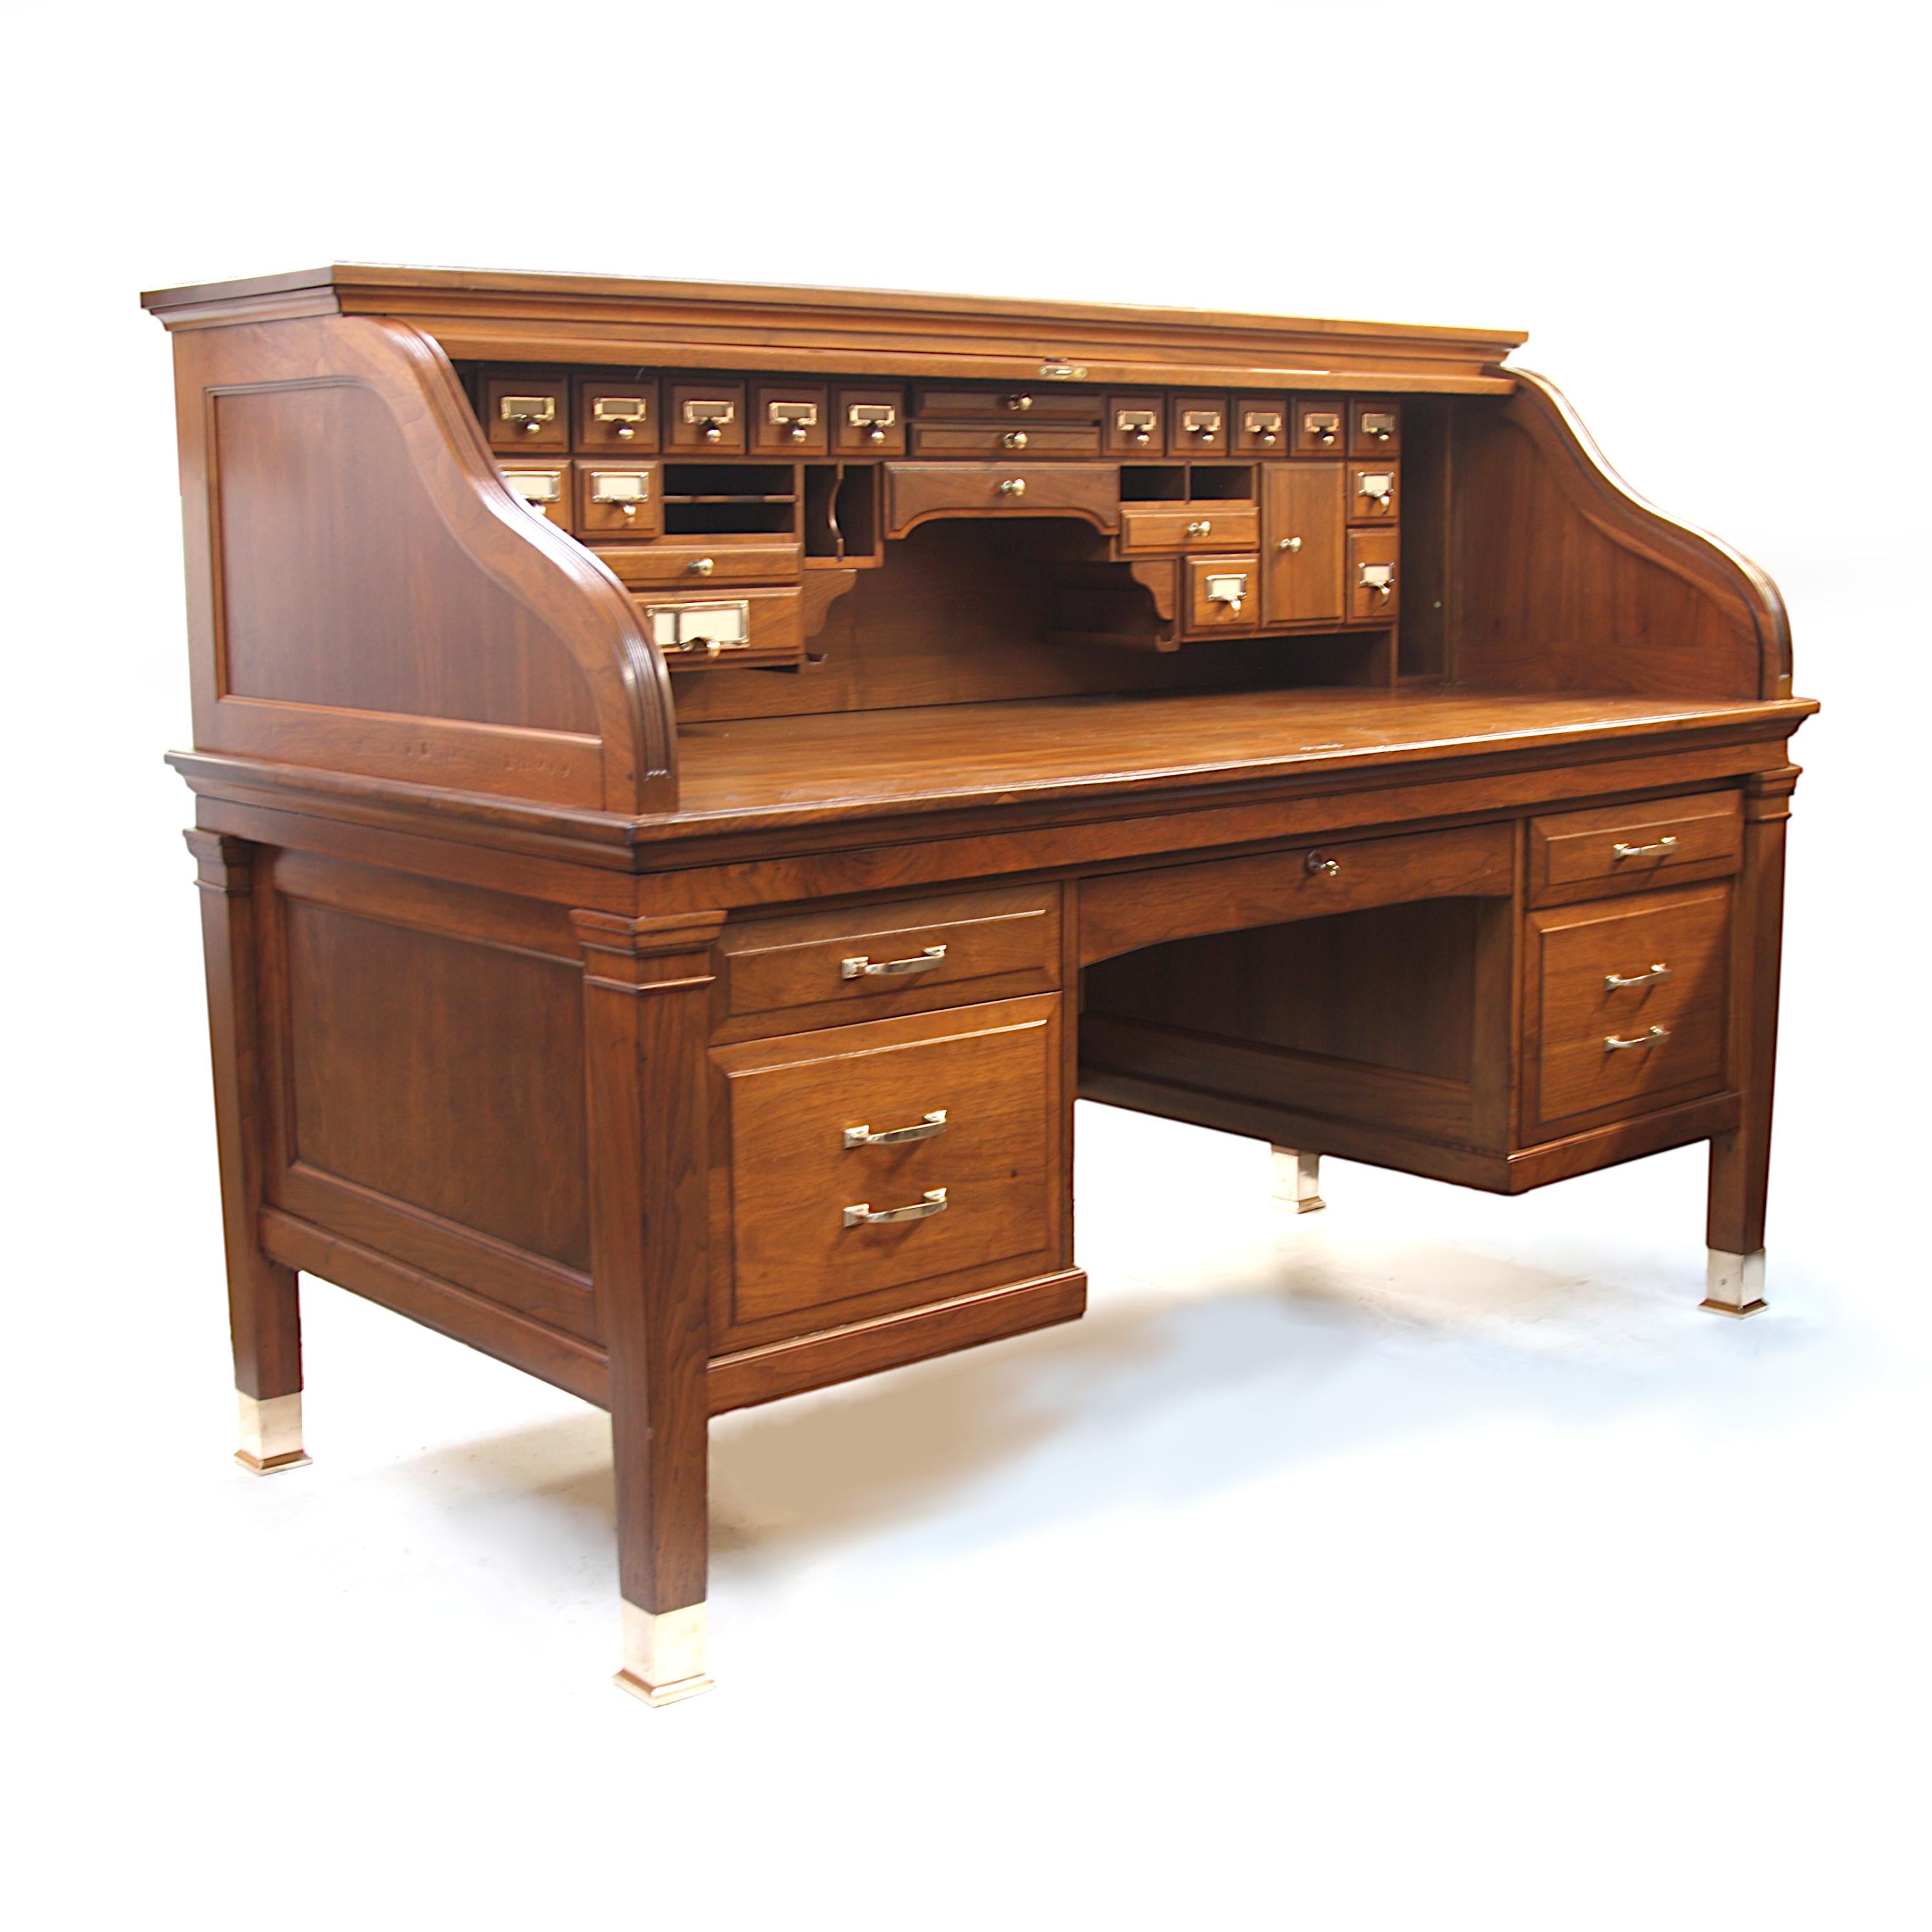 Wonderful 1940's vintage Roll top desk. Desk features S-curve tambour roll, solid brass hardware/feet, raised panel drawers, Empire styled details and grand scale! This is a fantastic looking desk that would make an impressive addition to any home